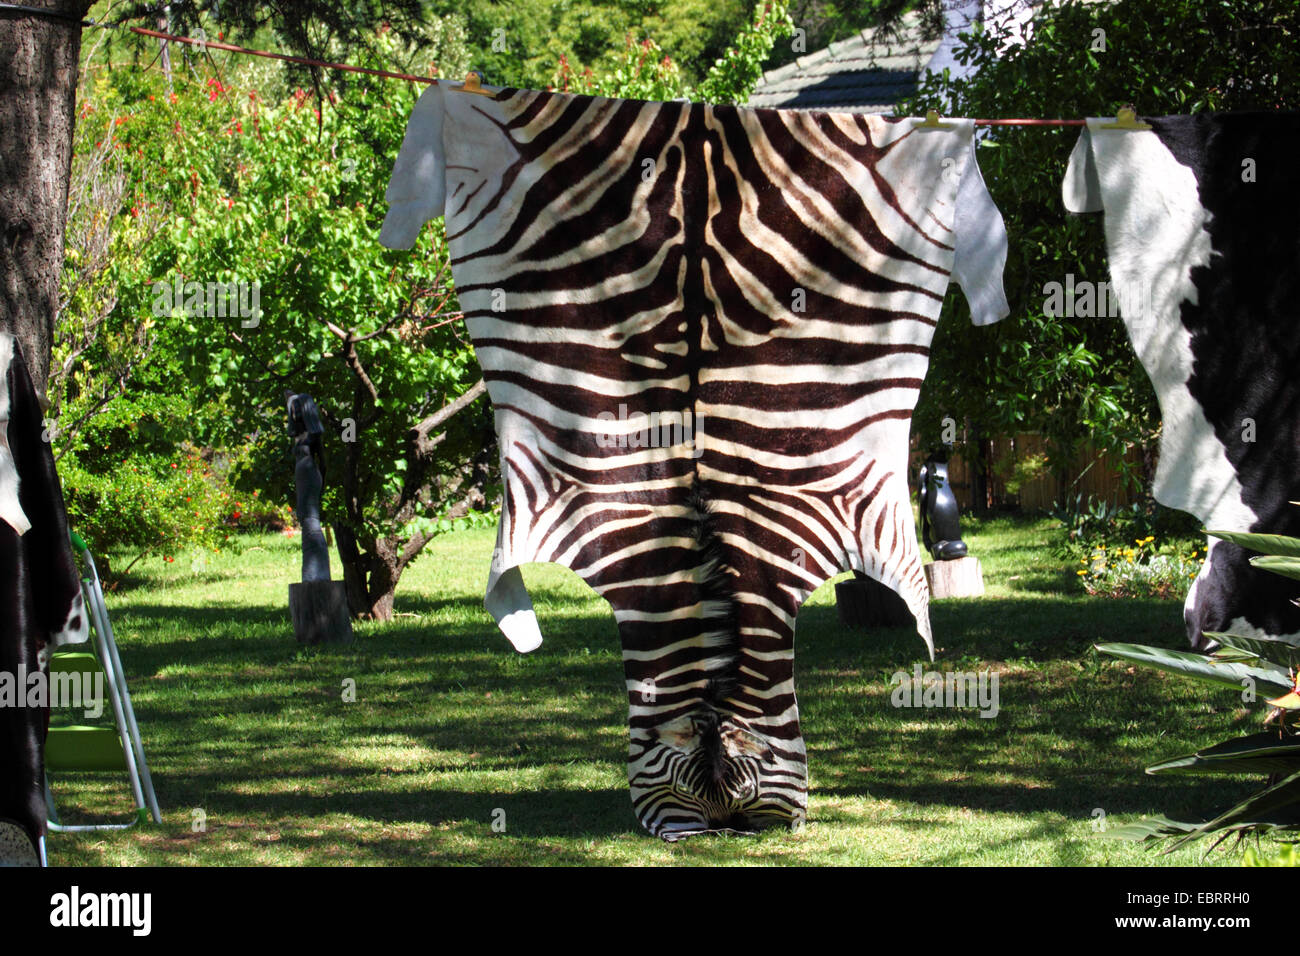 A zebra hide drying in the sun on a washing line. Stock Photo